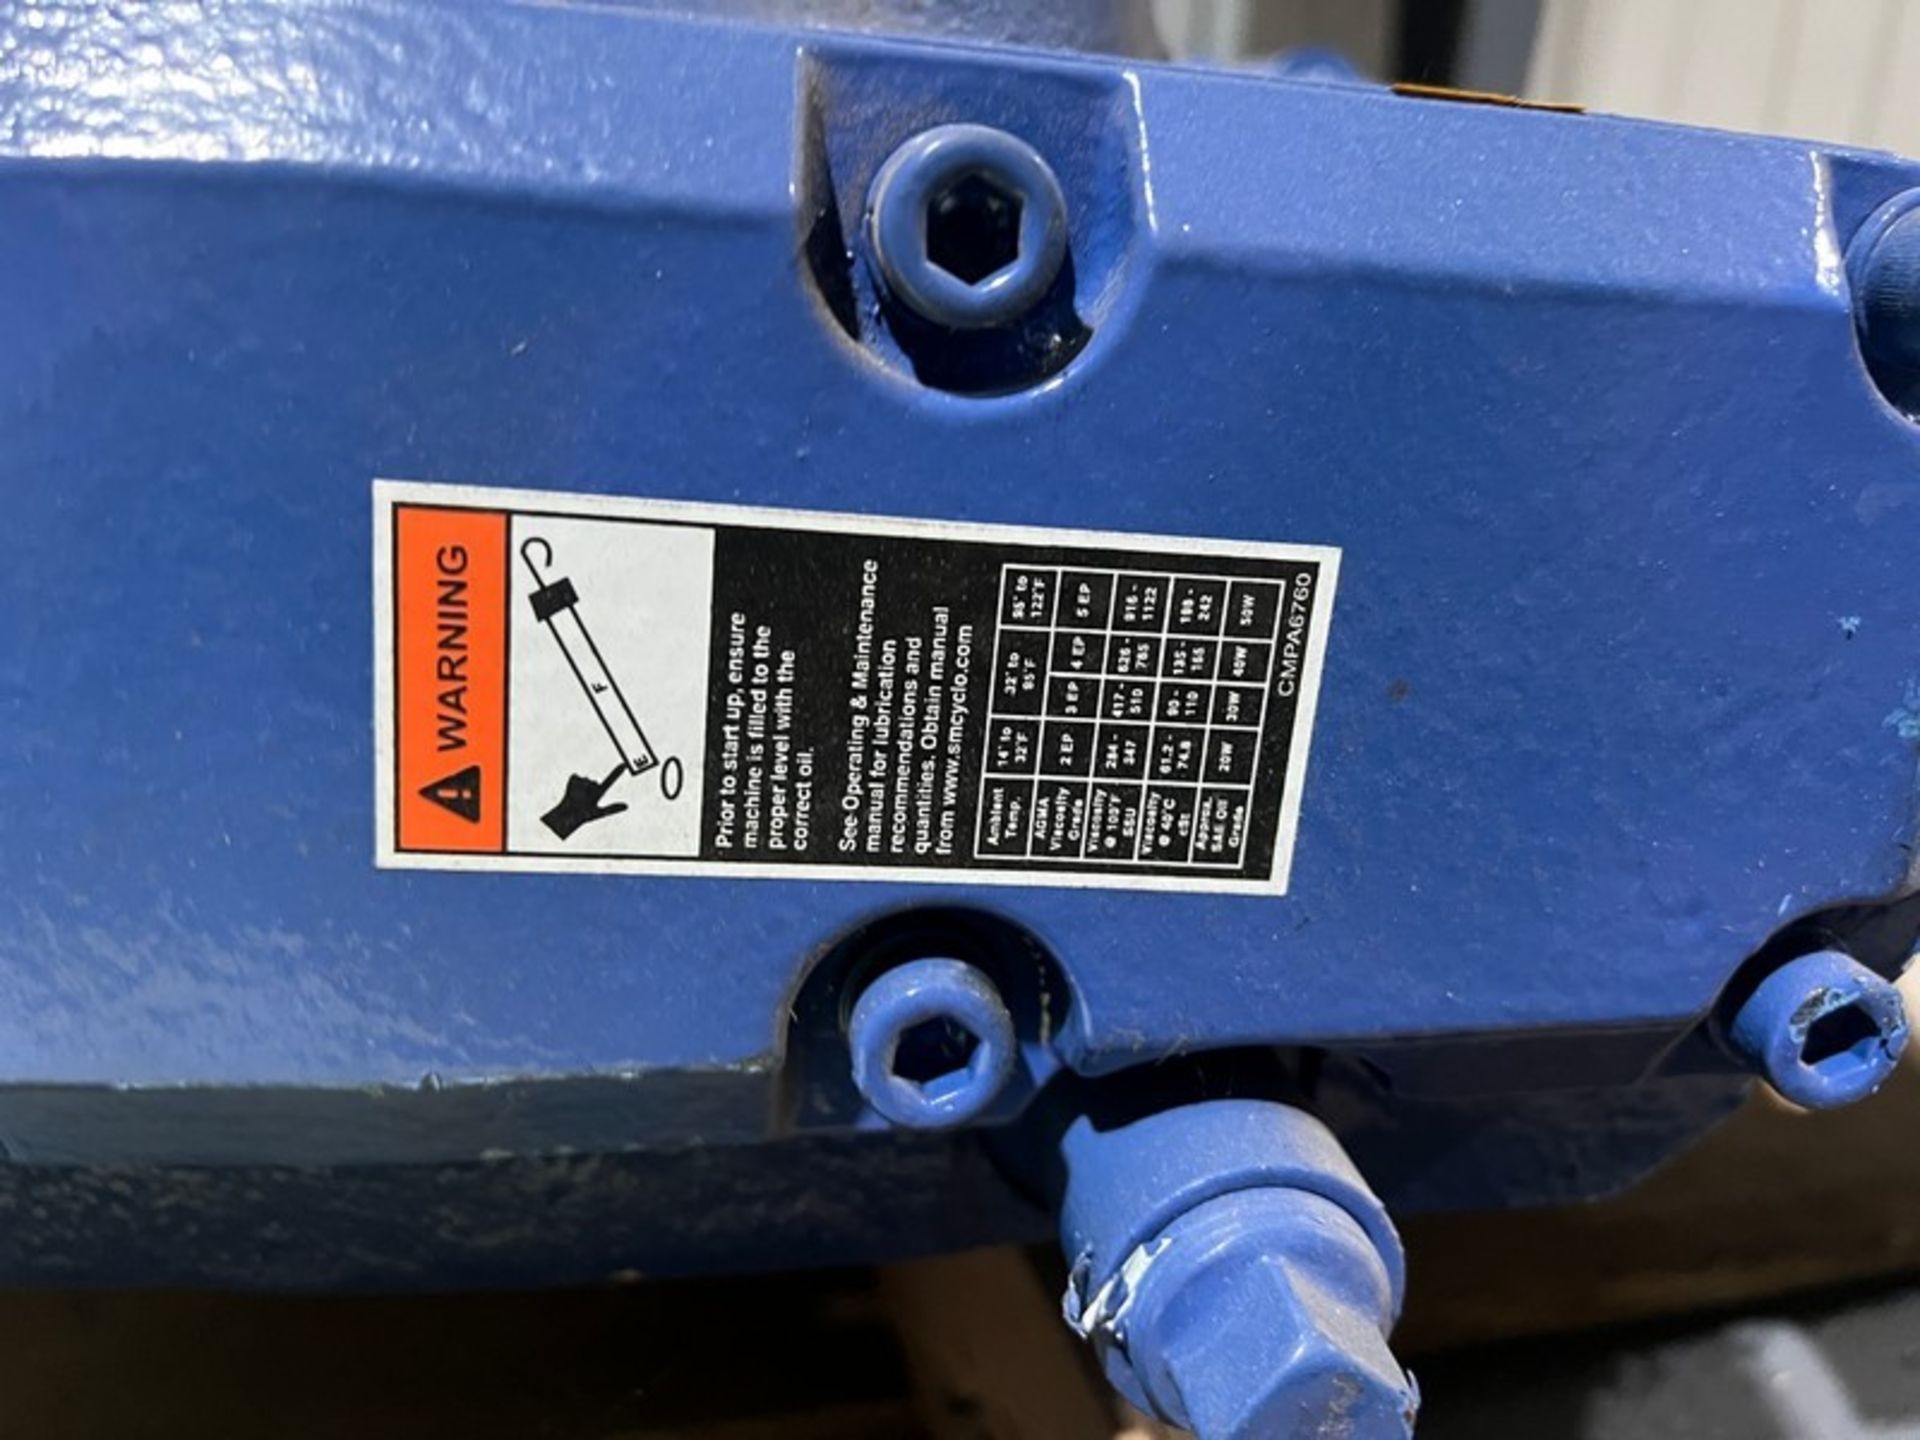 Sumitomo Gear Reducer (2019) (RIGGING INCLUDED WITH SALE PRICE) --Loading Fee $45.00***EUSA*** - Image 2 of 10